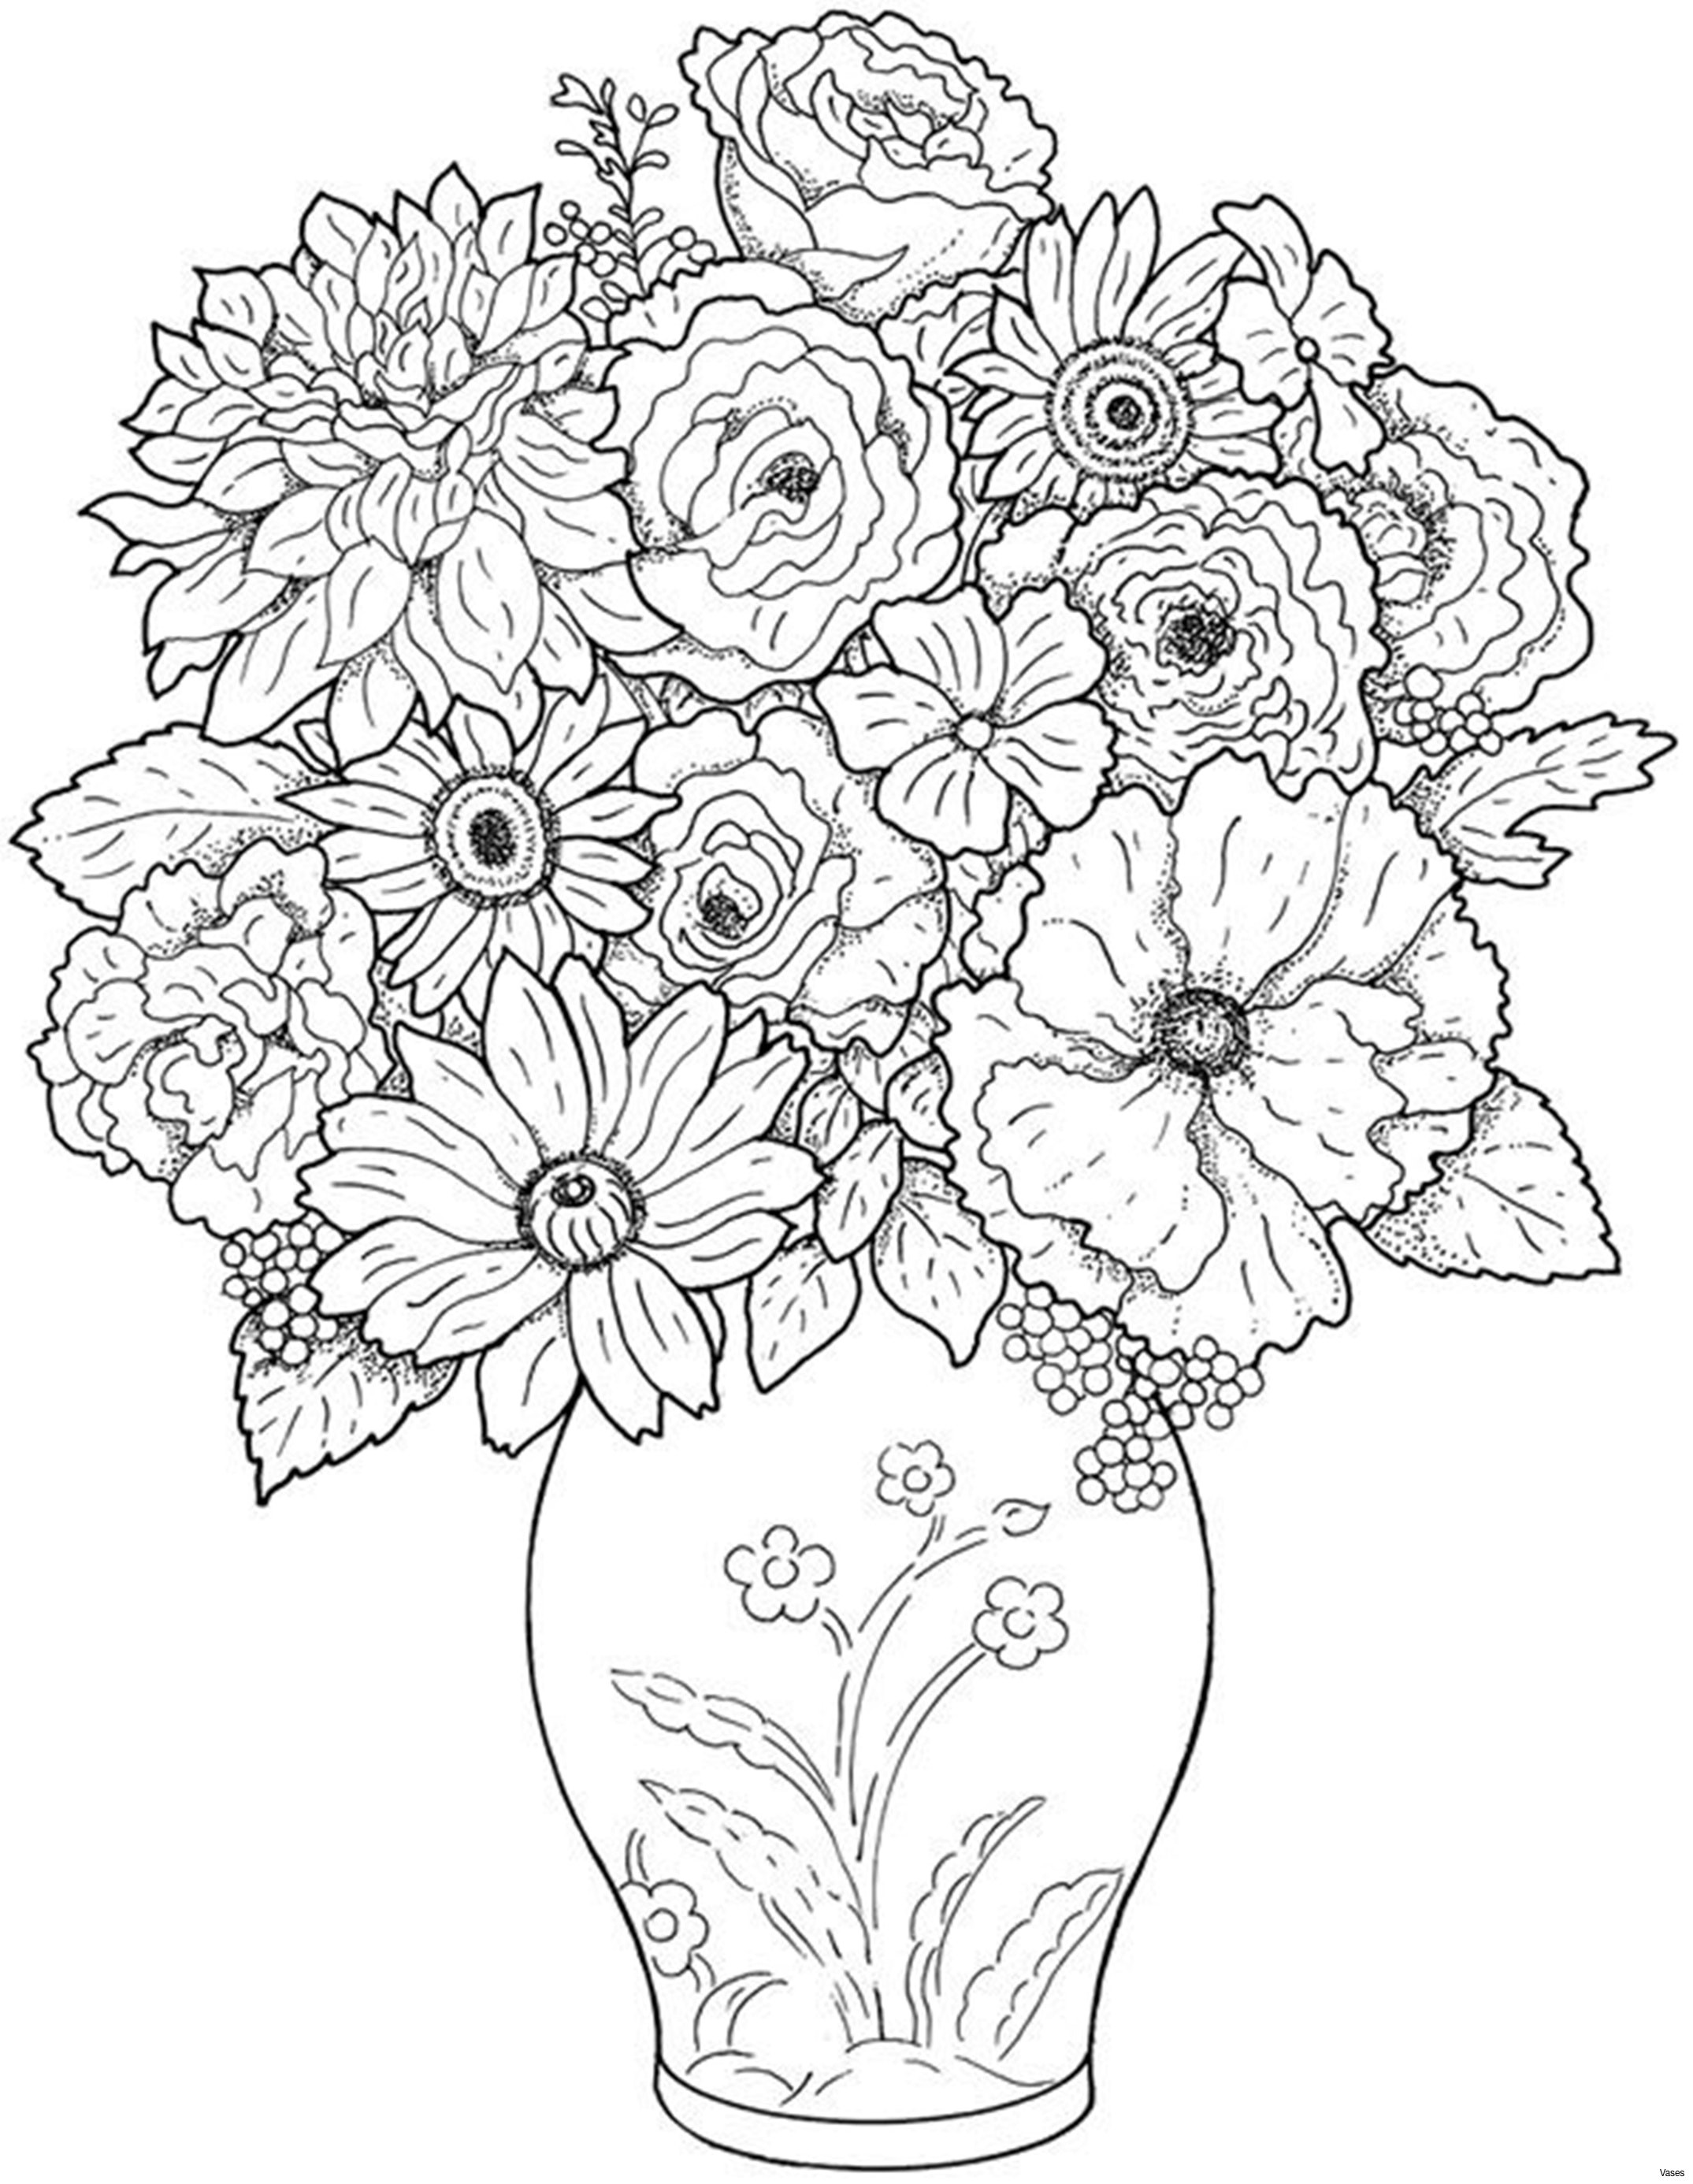 14 Lovely Flower Vases Near Me 2024 free download flower vases near me of cool vases flower vase coloring page pages flowers in a top i 0d ruva within cool vases flower vase coloring page pages flowers in a top i 0d